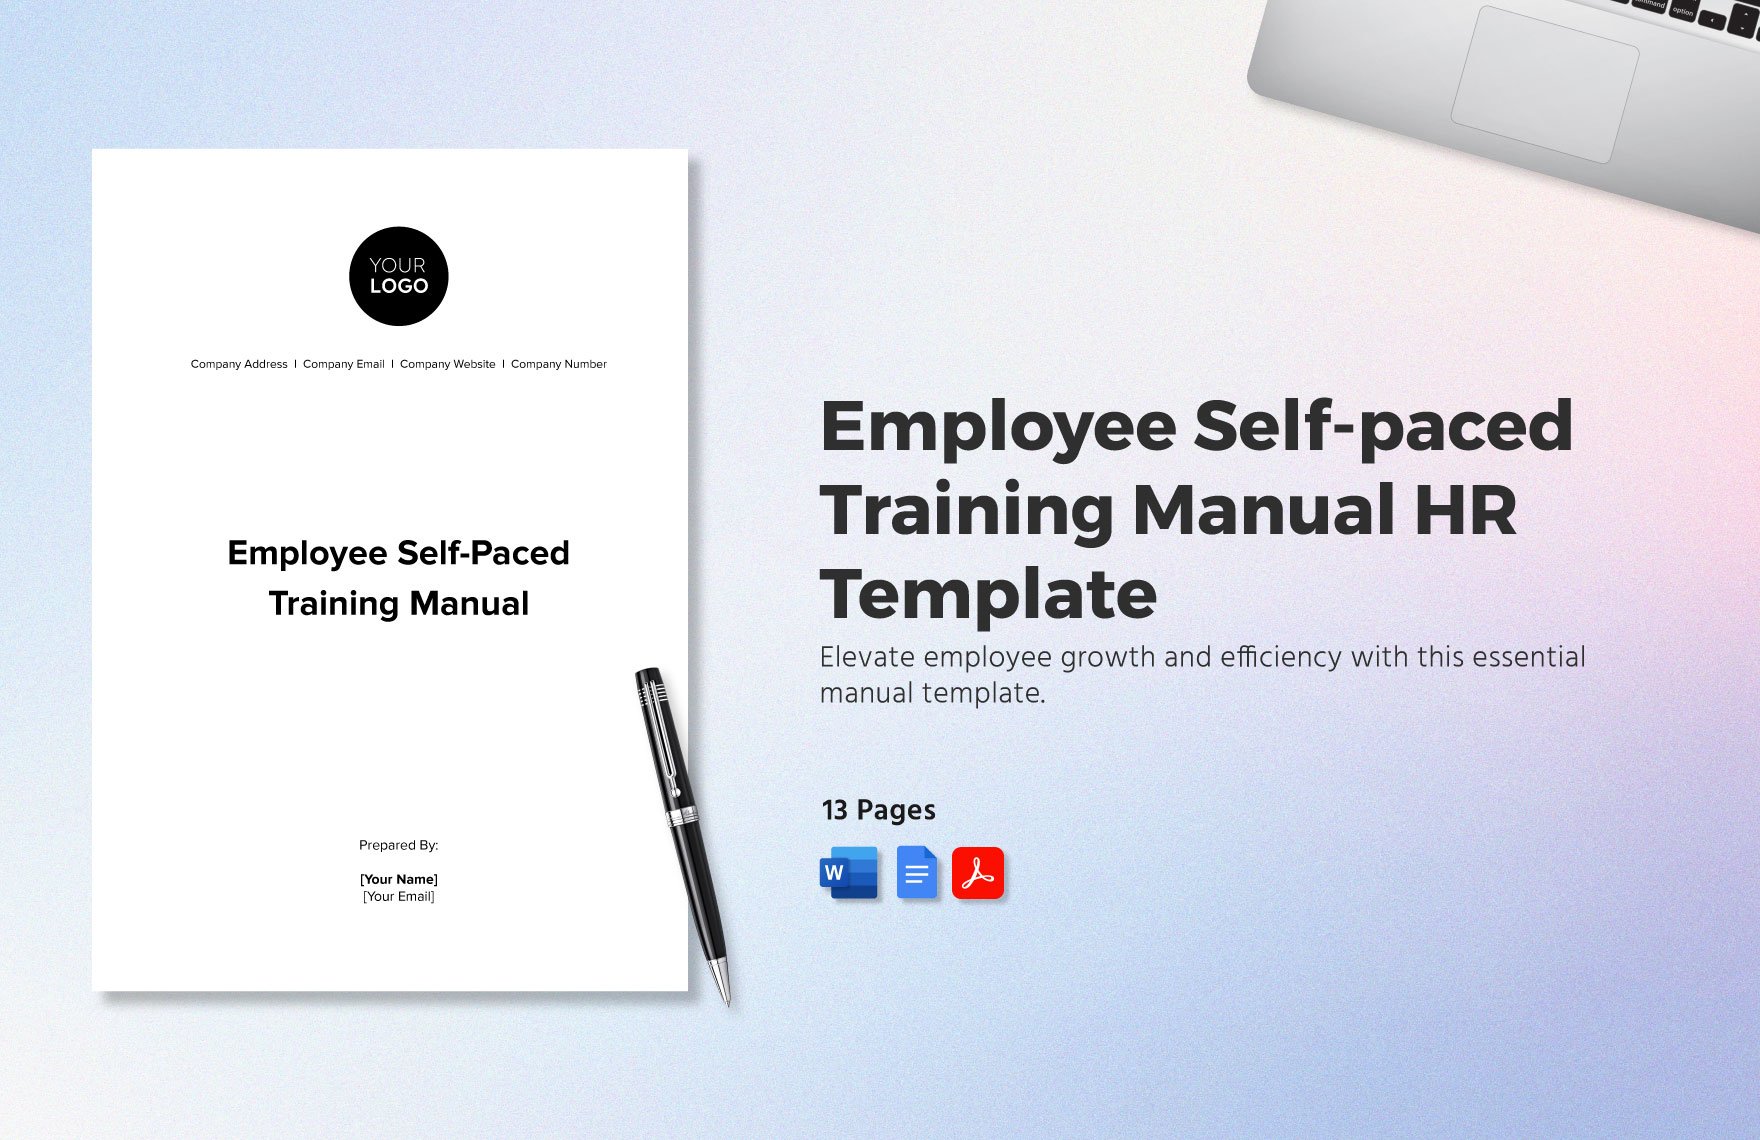 Employee Self-paced Training Manual HR Template in Word, Google Docs, PDF